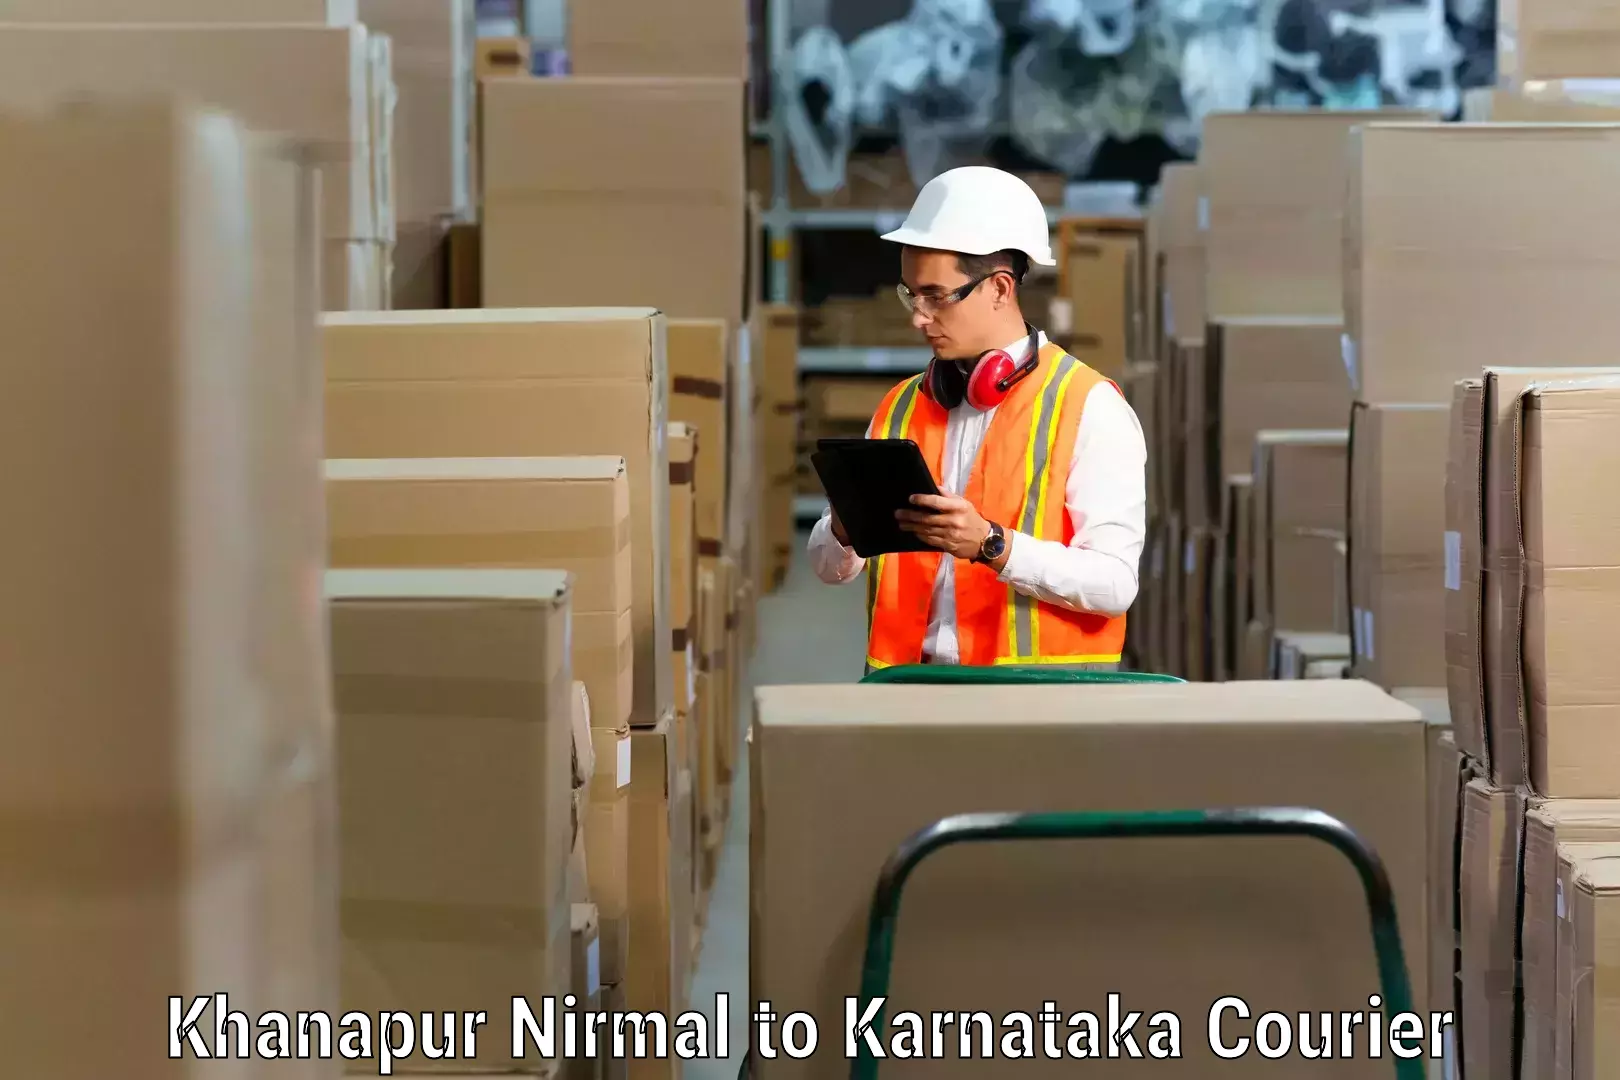 Furniture moving assistance in Khanapur Nirmal to Mangalore Port